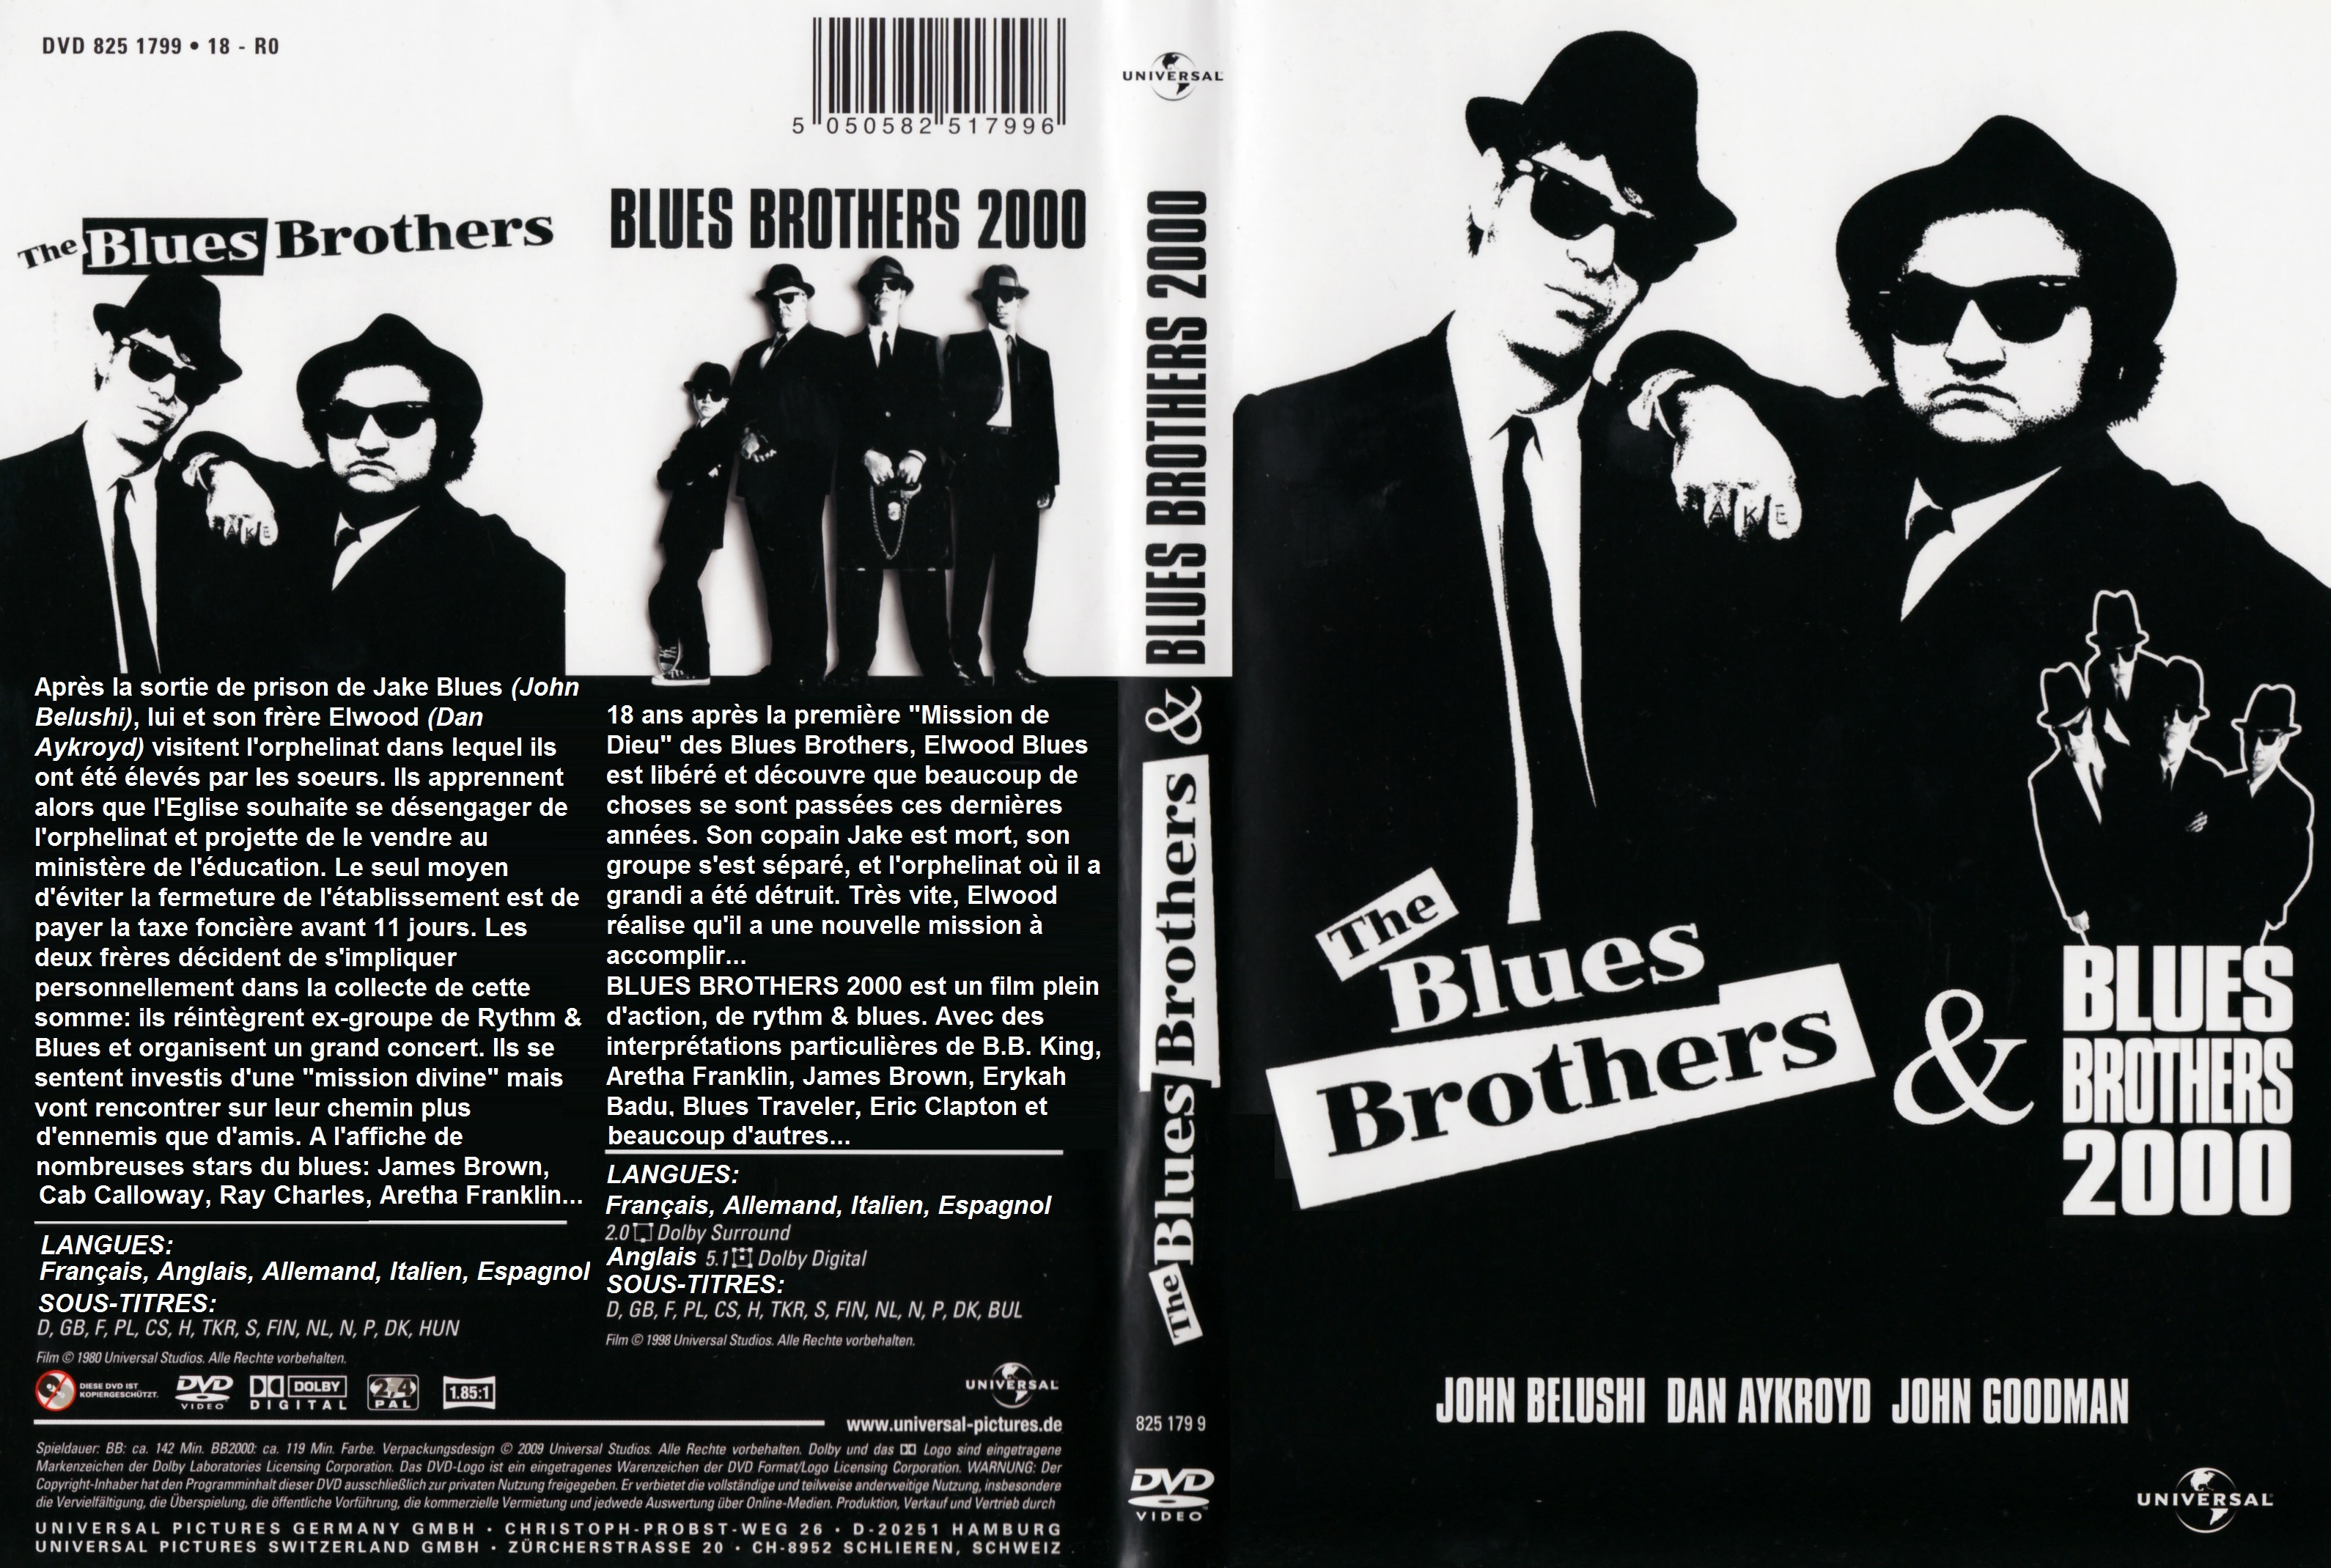 Jaquette DVD The Blues Brothers & Blues Brothers 2000 custom